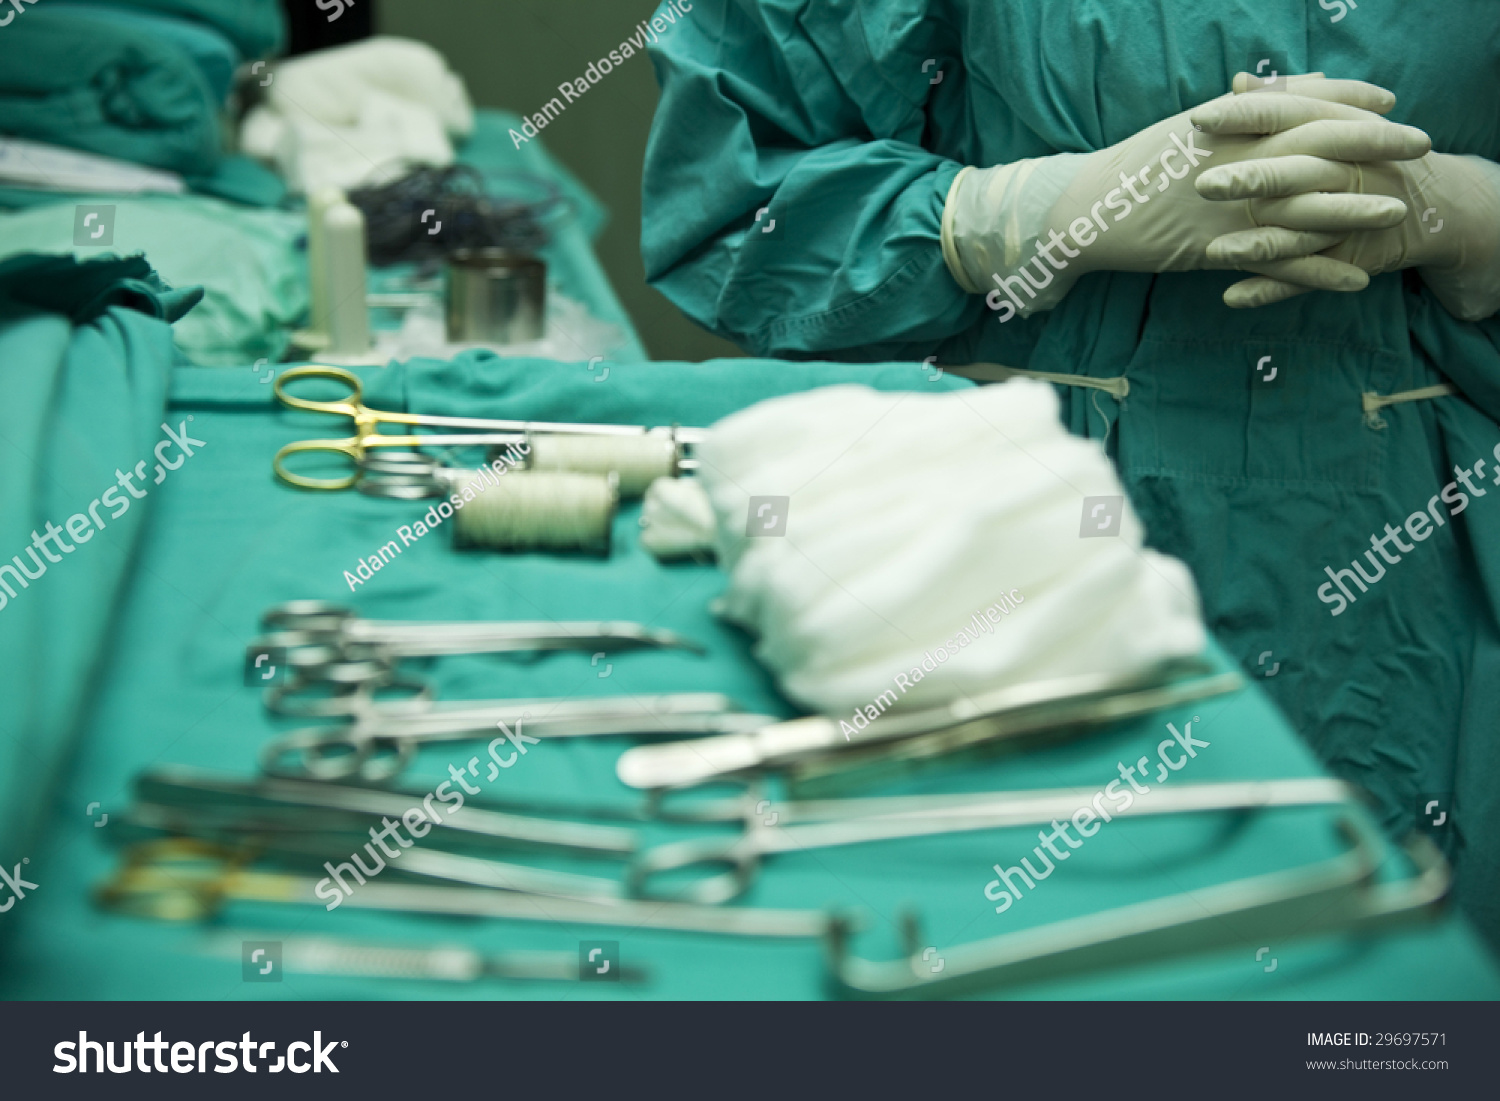 Pictures Of Operating Room Instruments 16